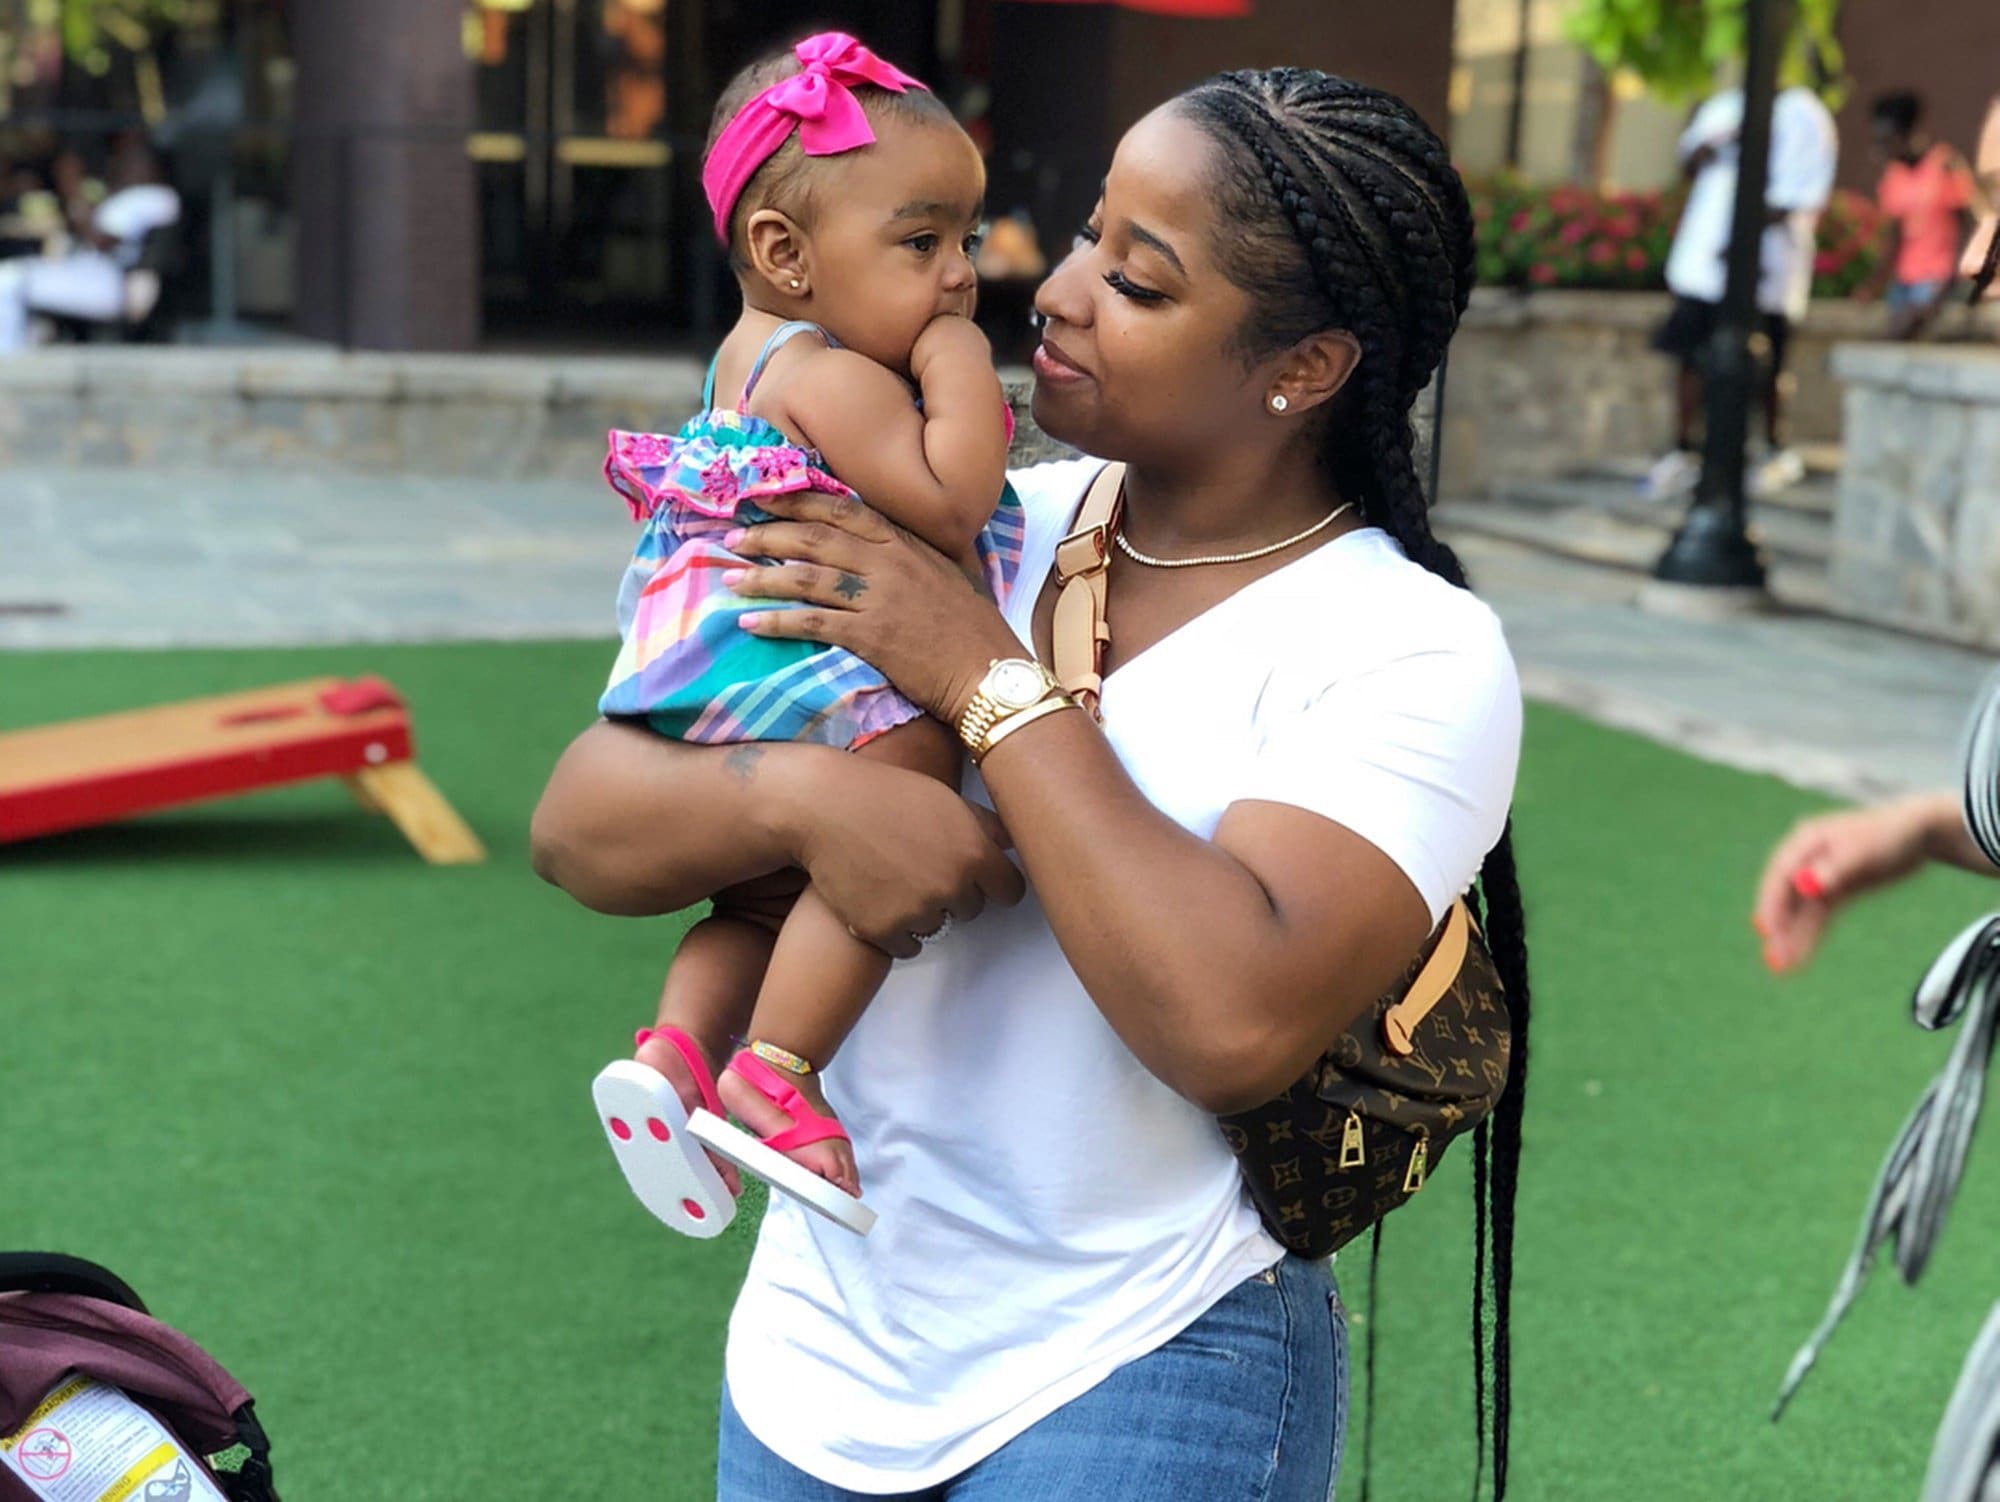 Toya Wright's Daughter Reign Rushing Could Not Be Any Prettier In The Latest Video - Watch It Here